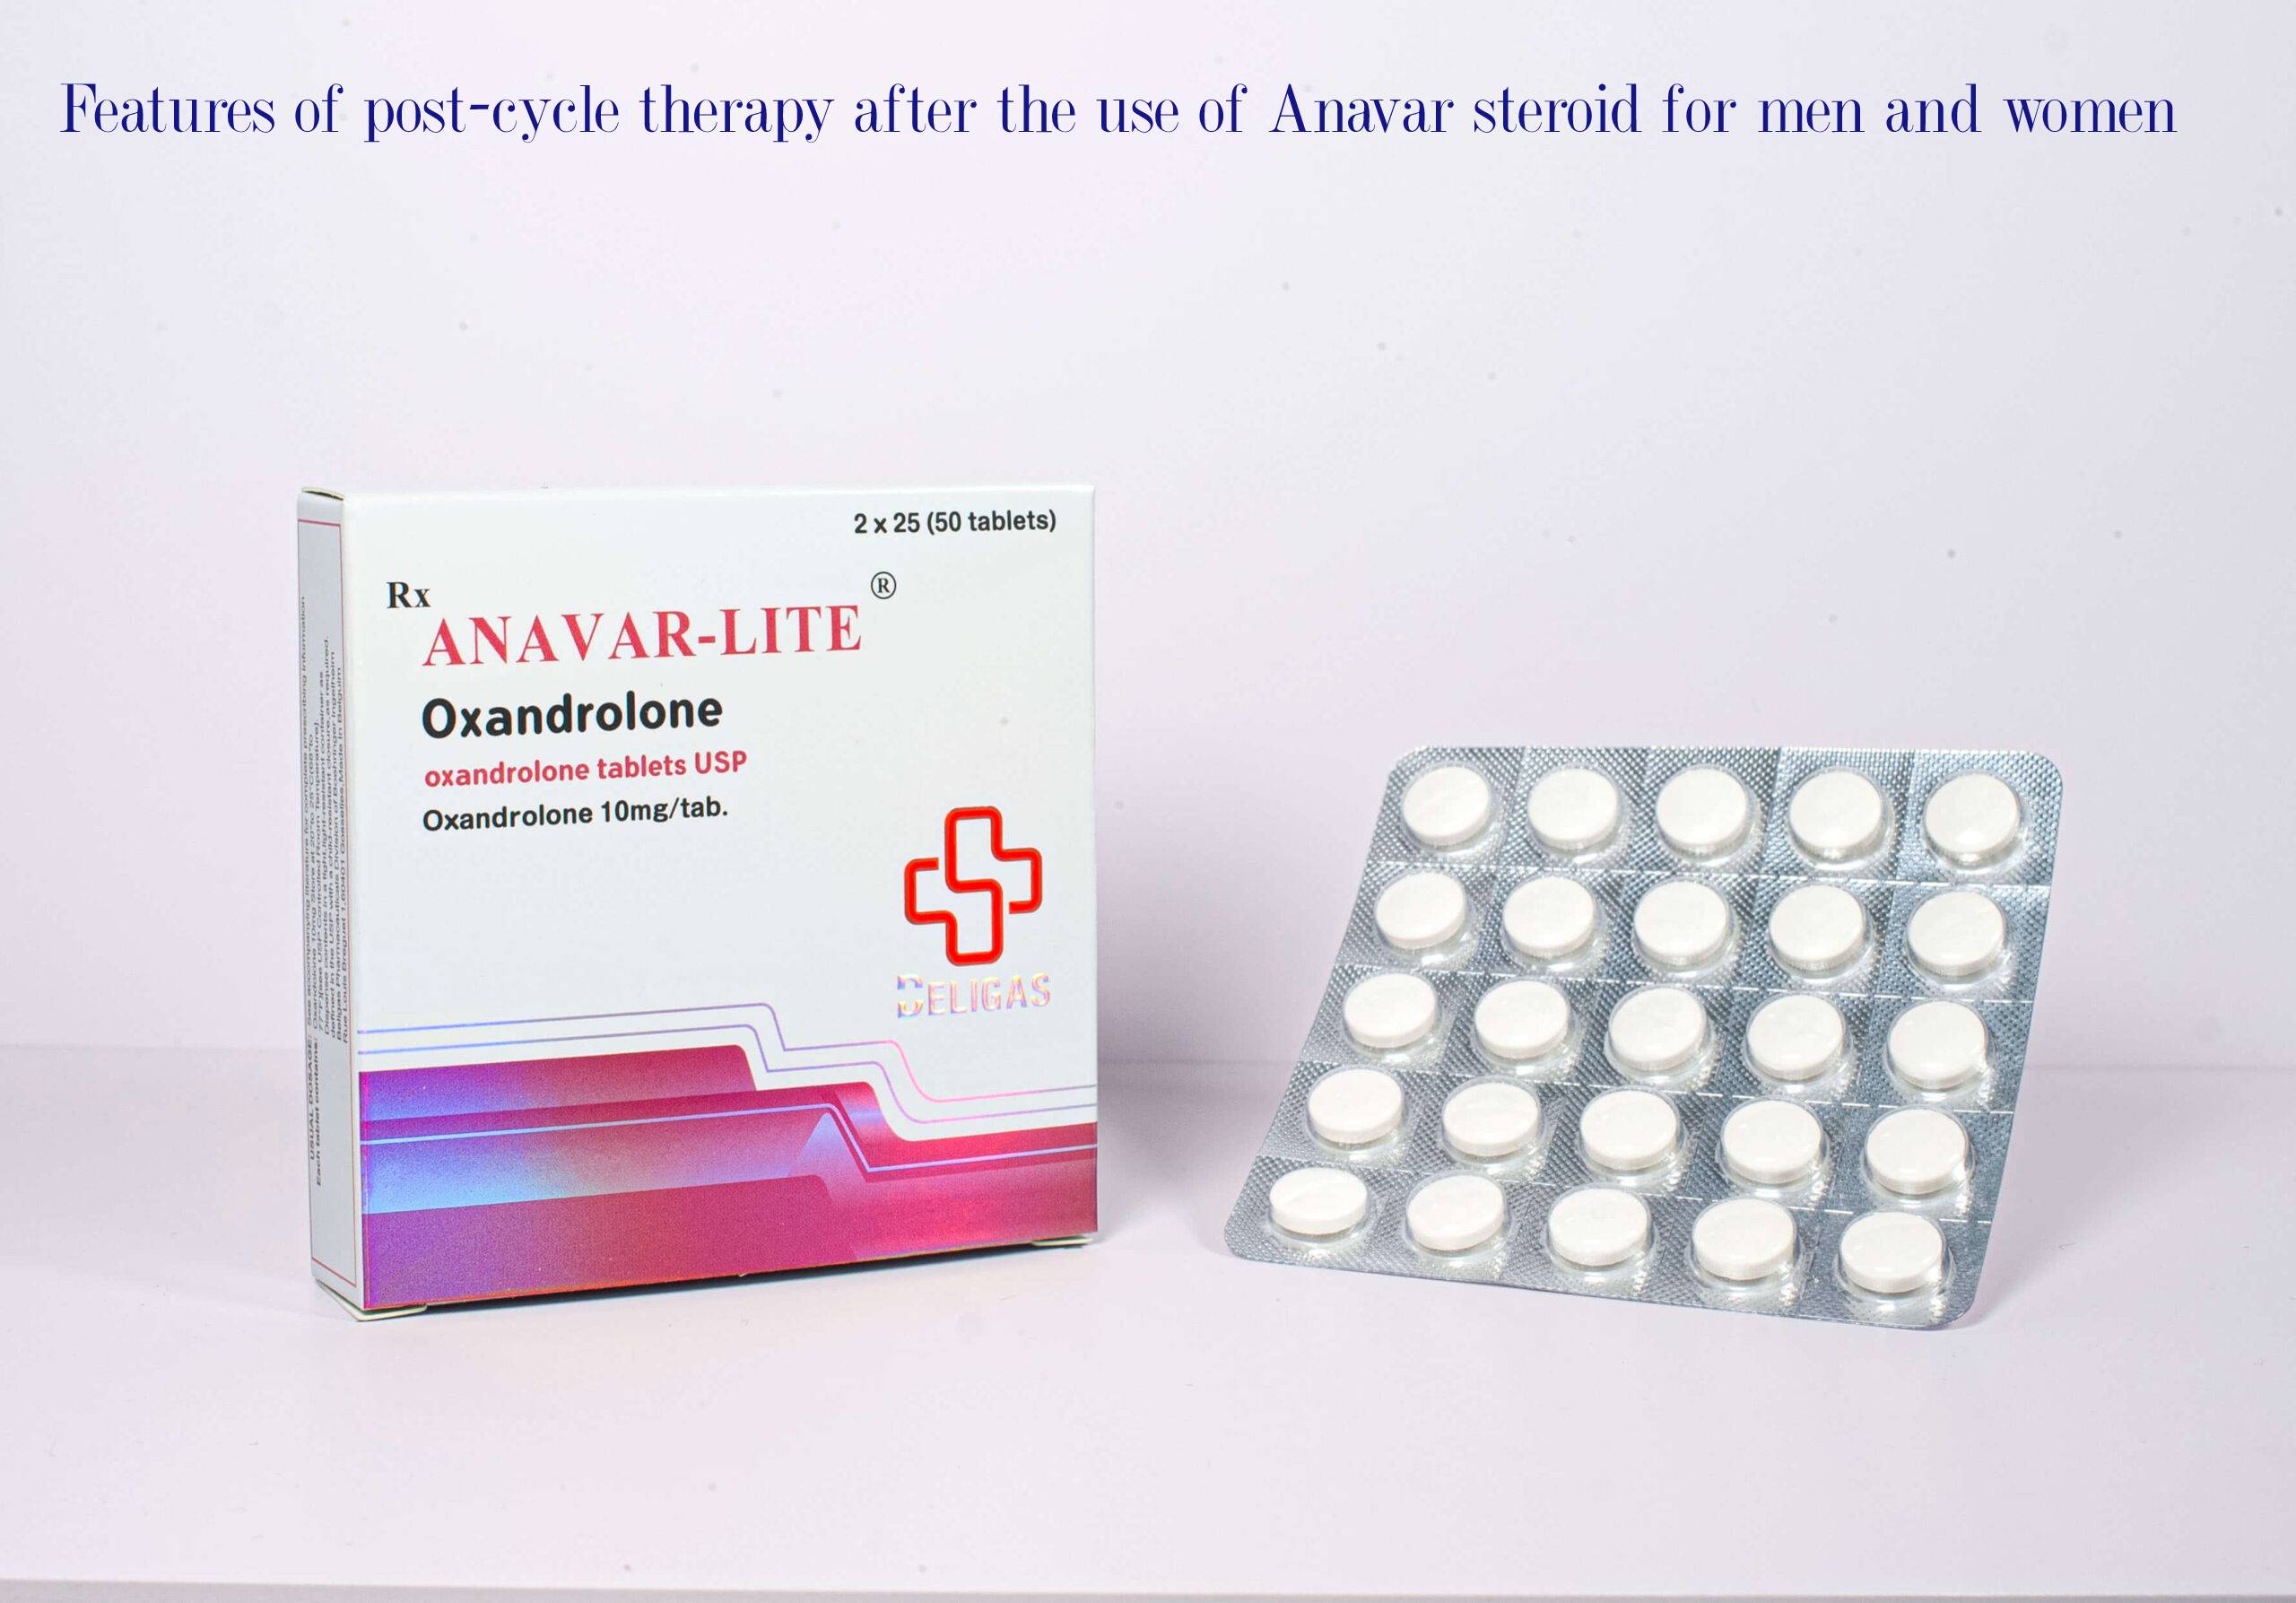 Features of post-cycle therapy after the use of Anavar steroid for men and women